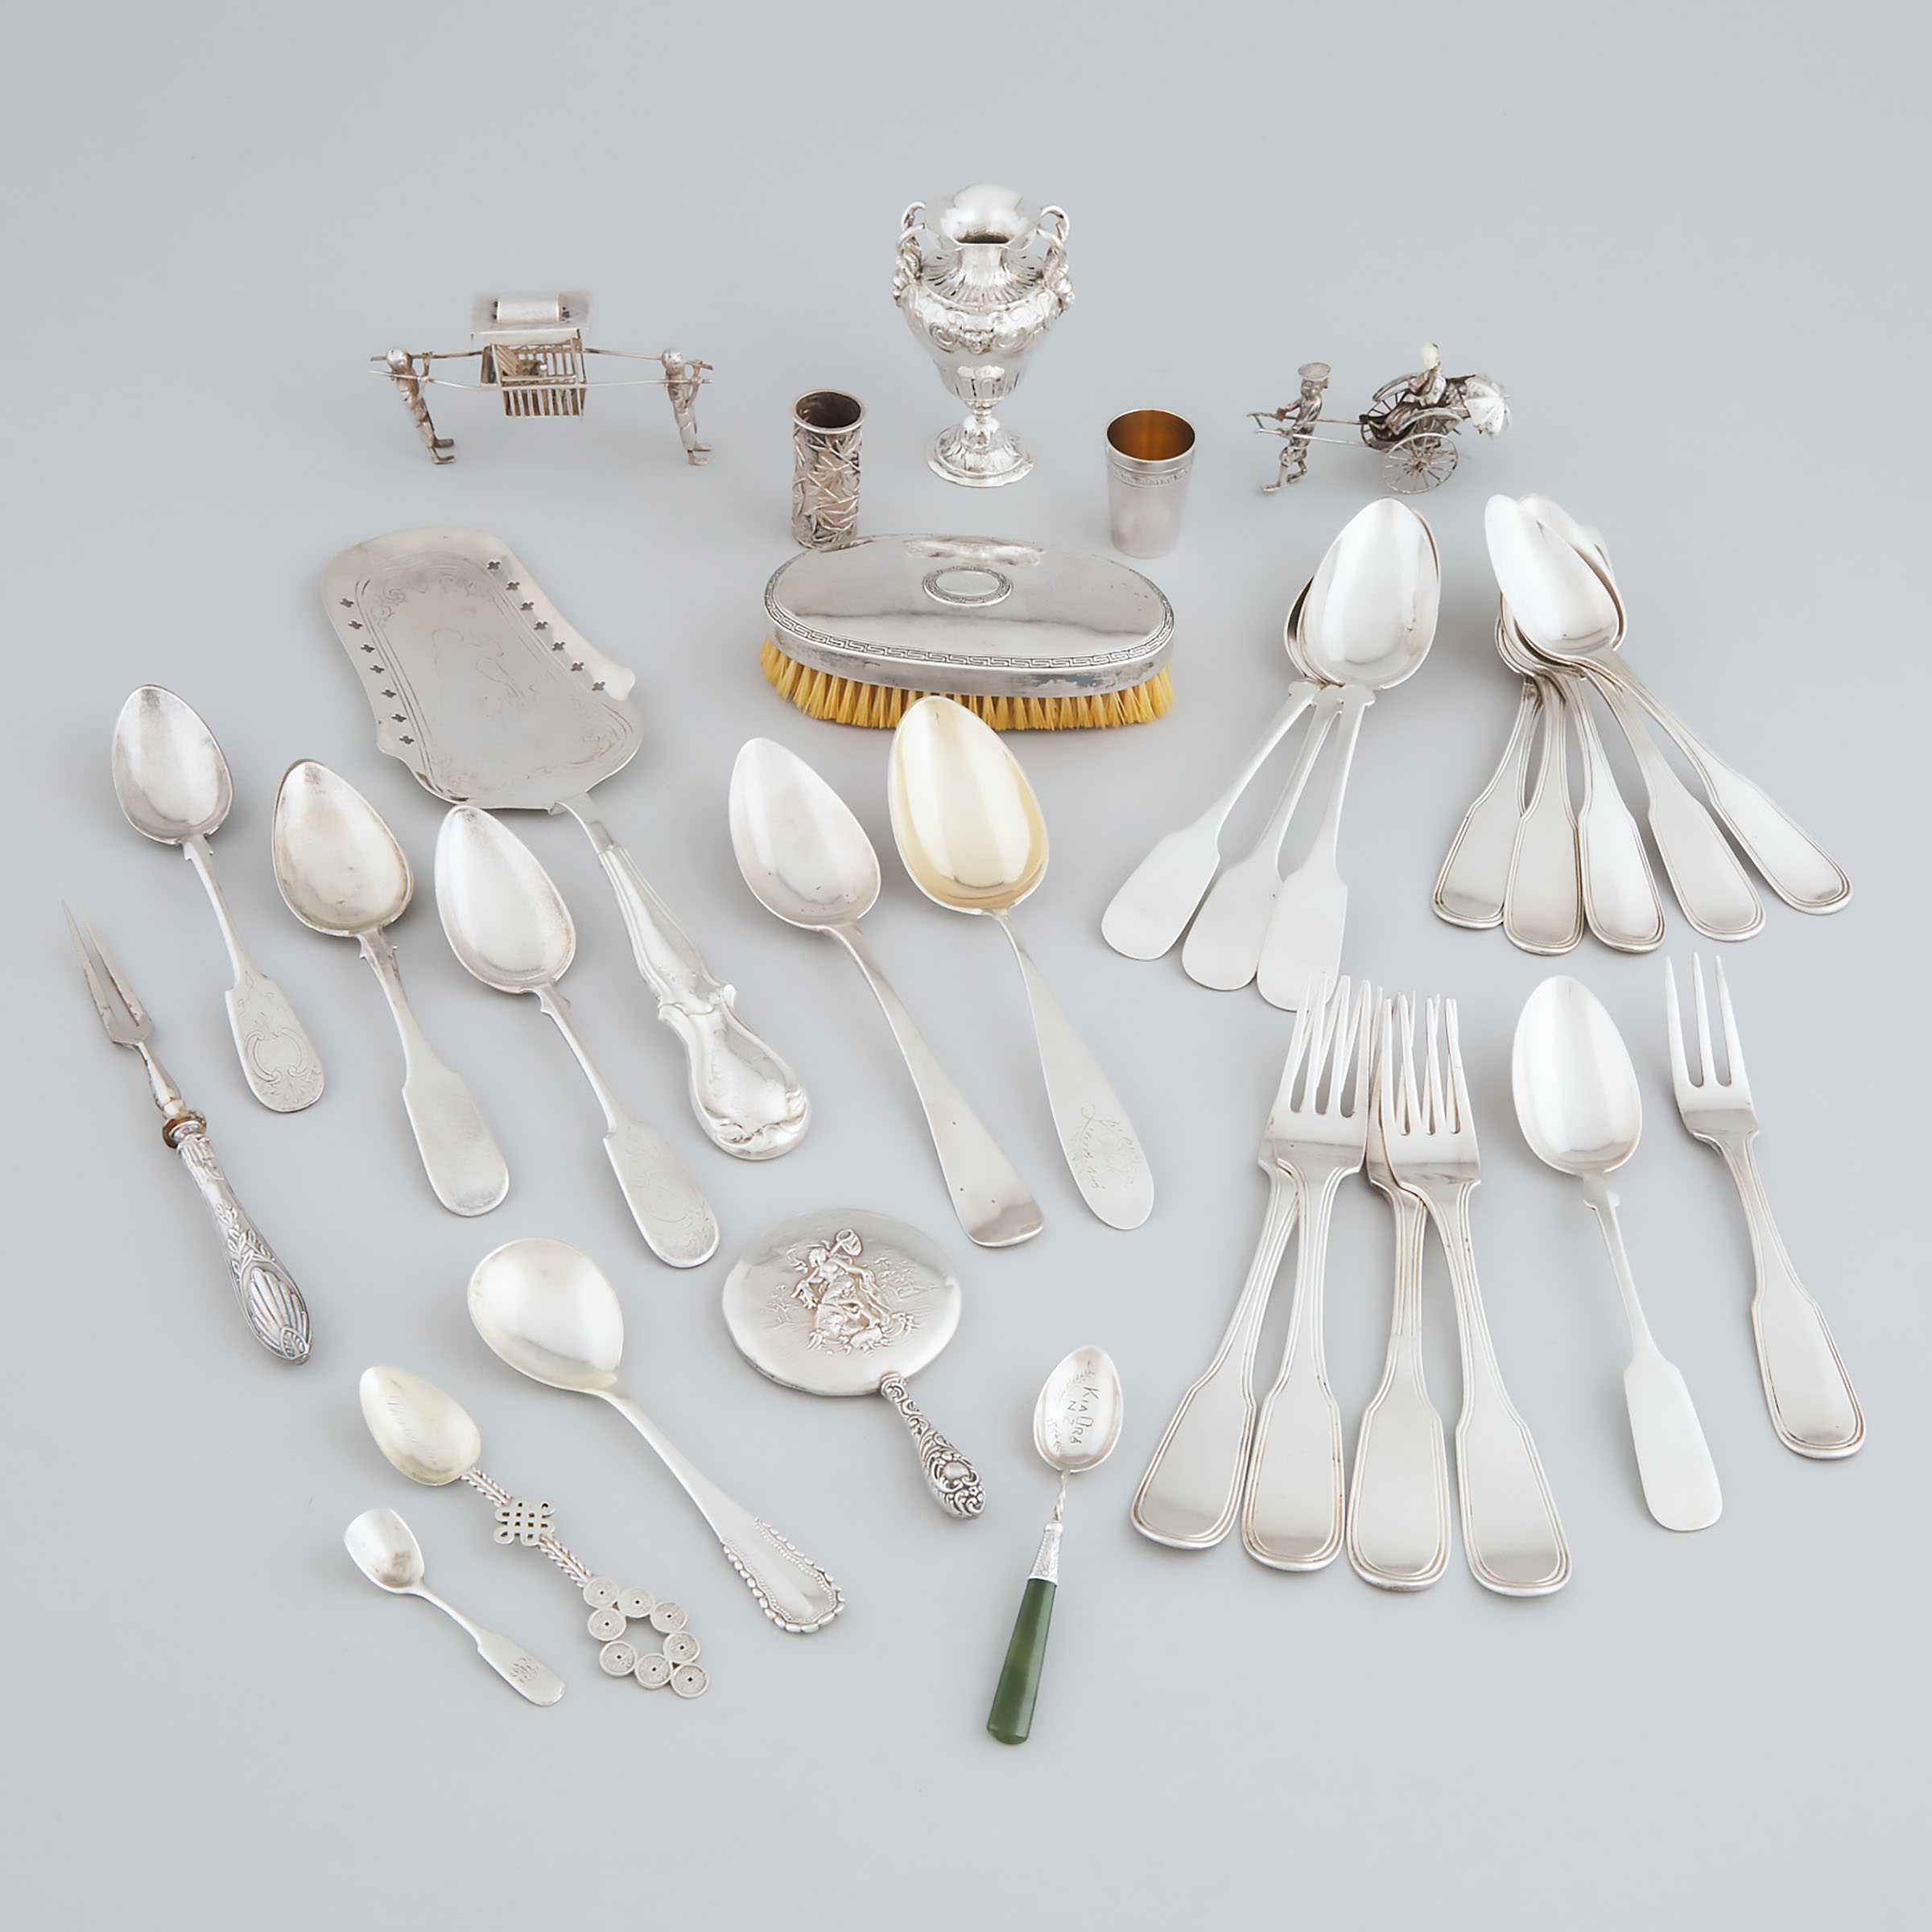 Group of Mainly Continental European and Chinese Export Silver, 19th/20th century